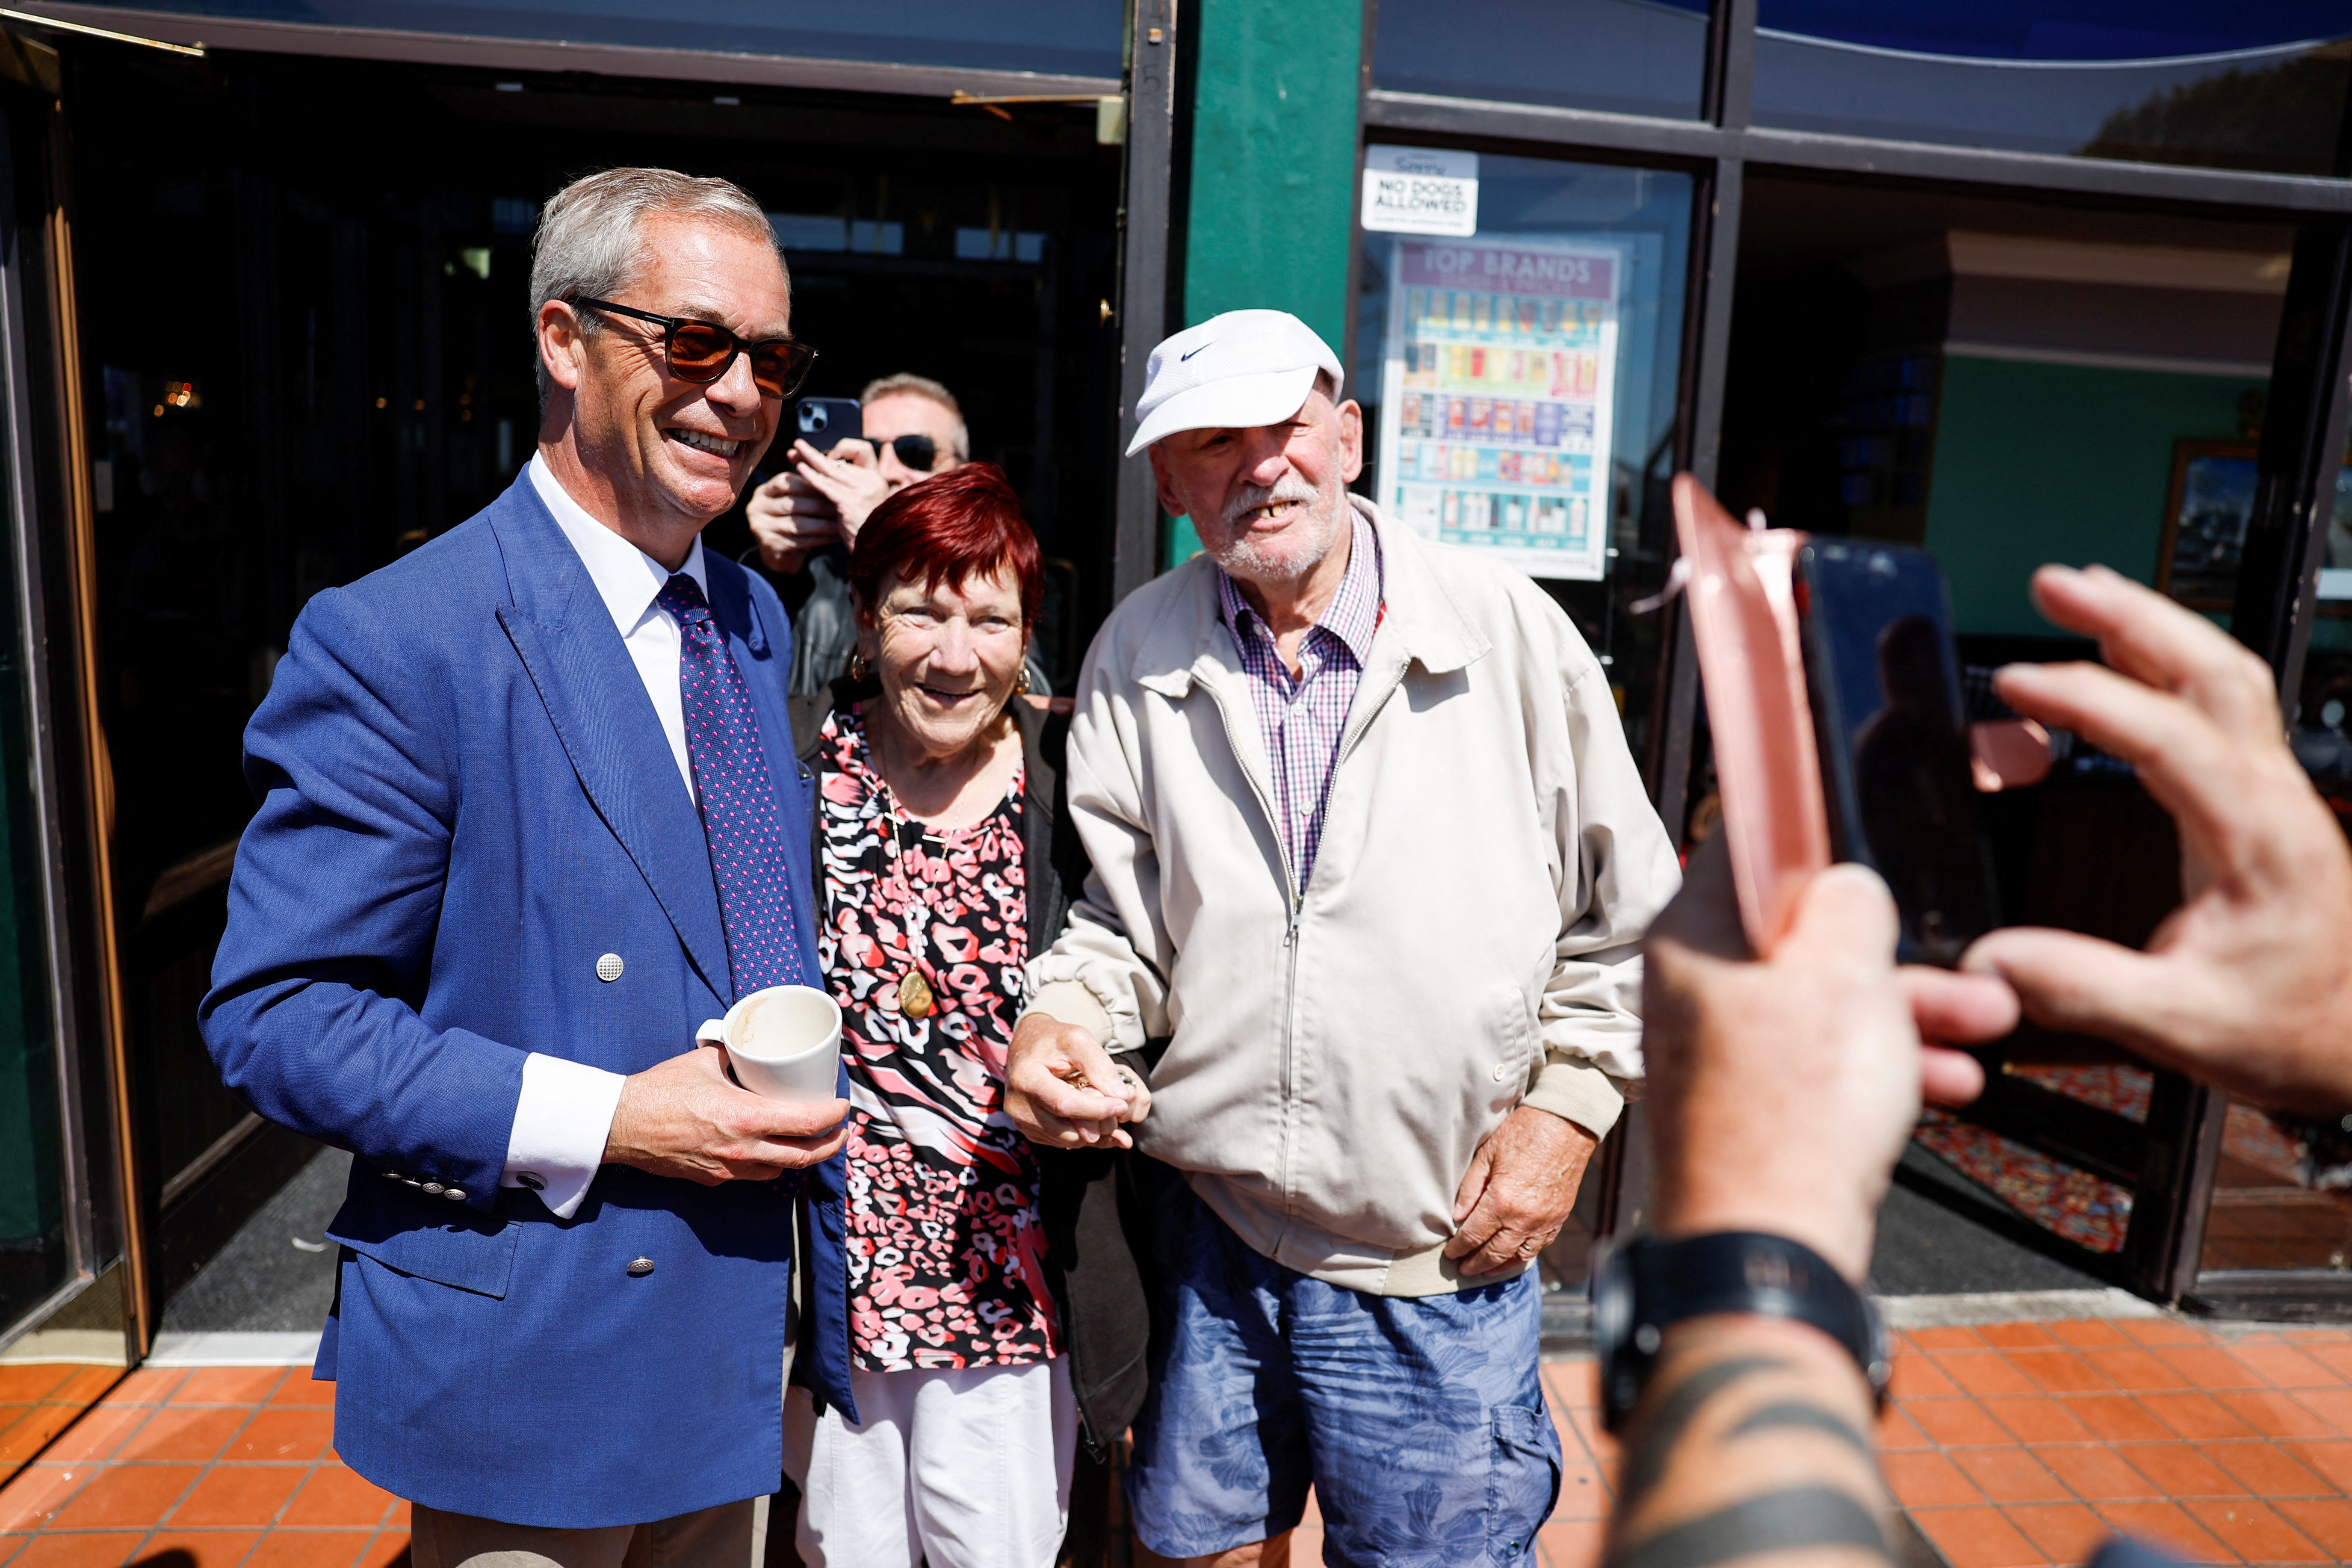 Nigel Farage poses with people, on the day of the general election, in Clacton-on-Sea, Britain